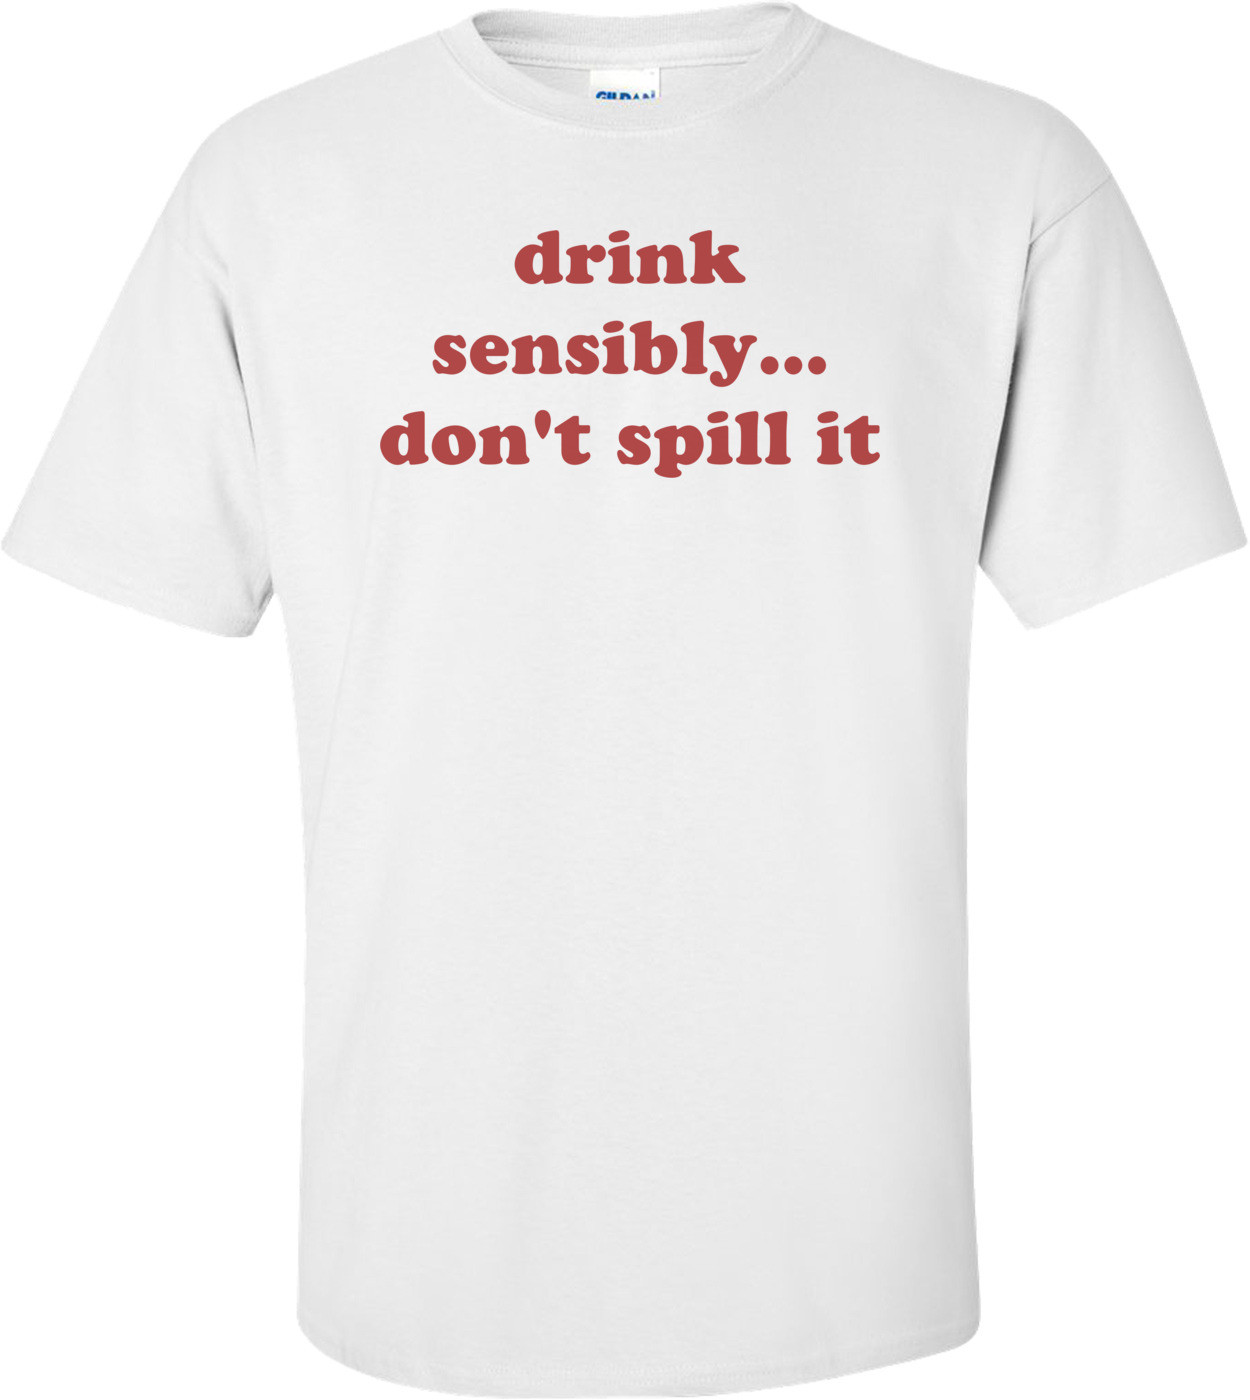 drink sensibly... don't spill it